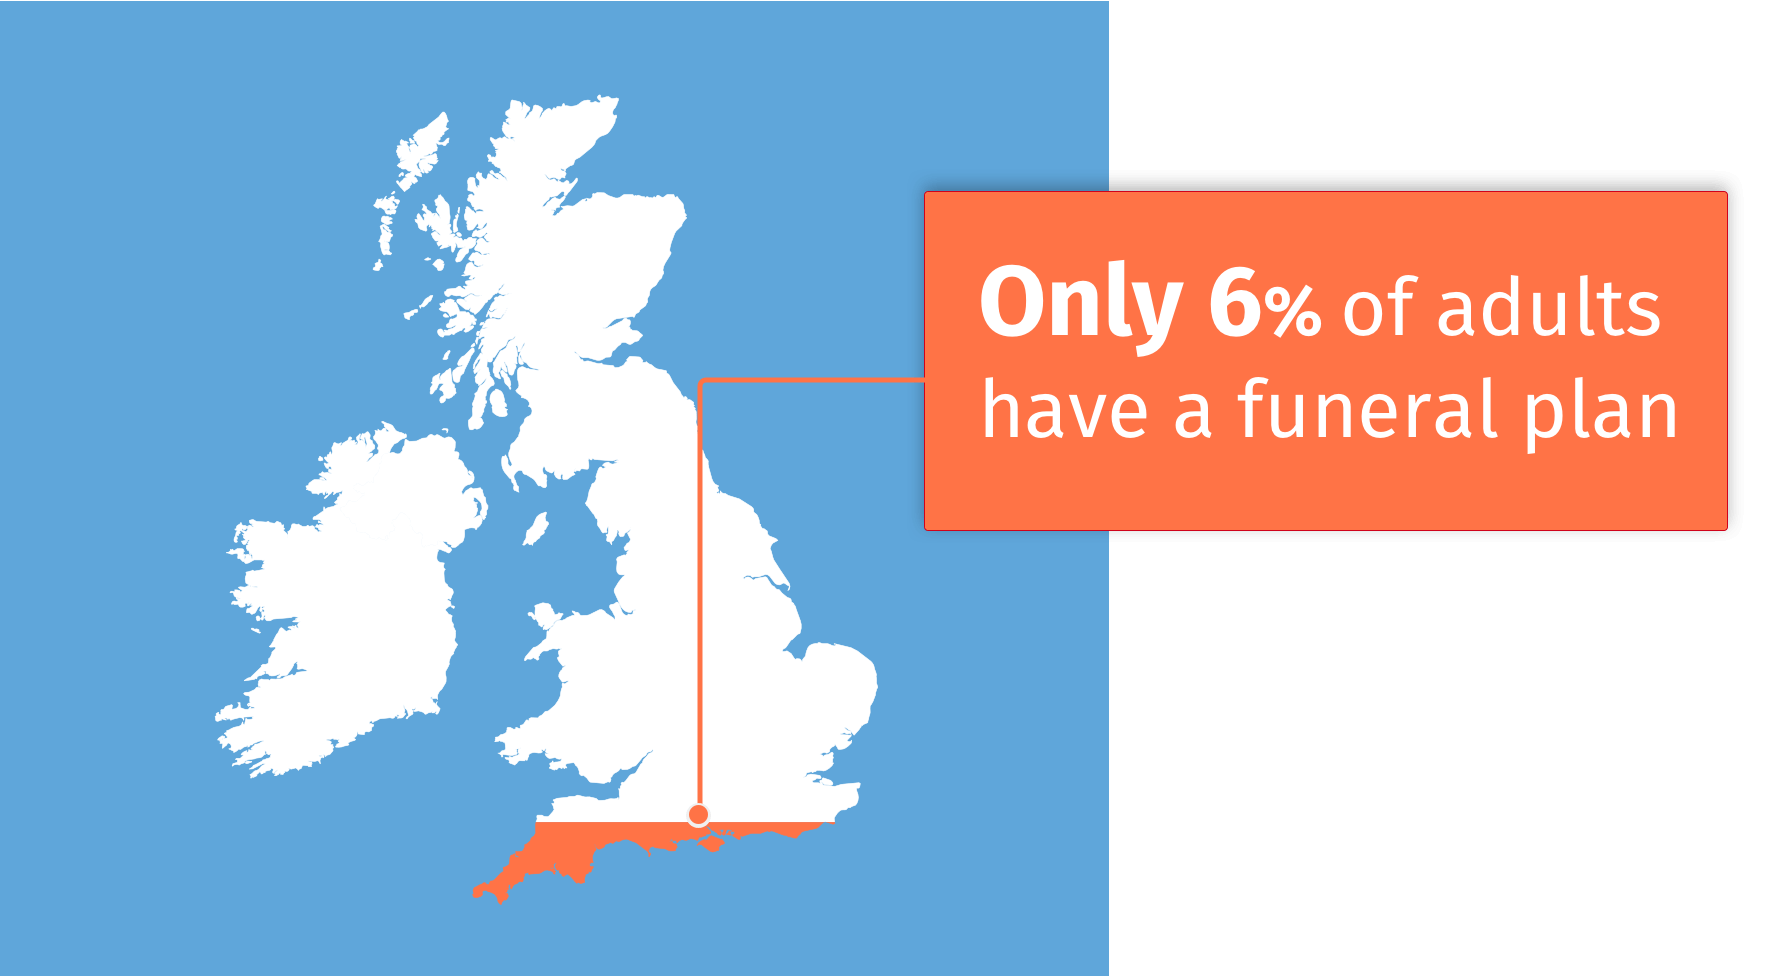 Funeral Plans owned across the UK